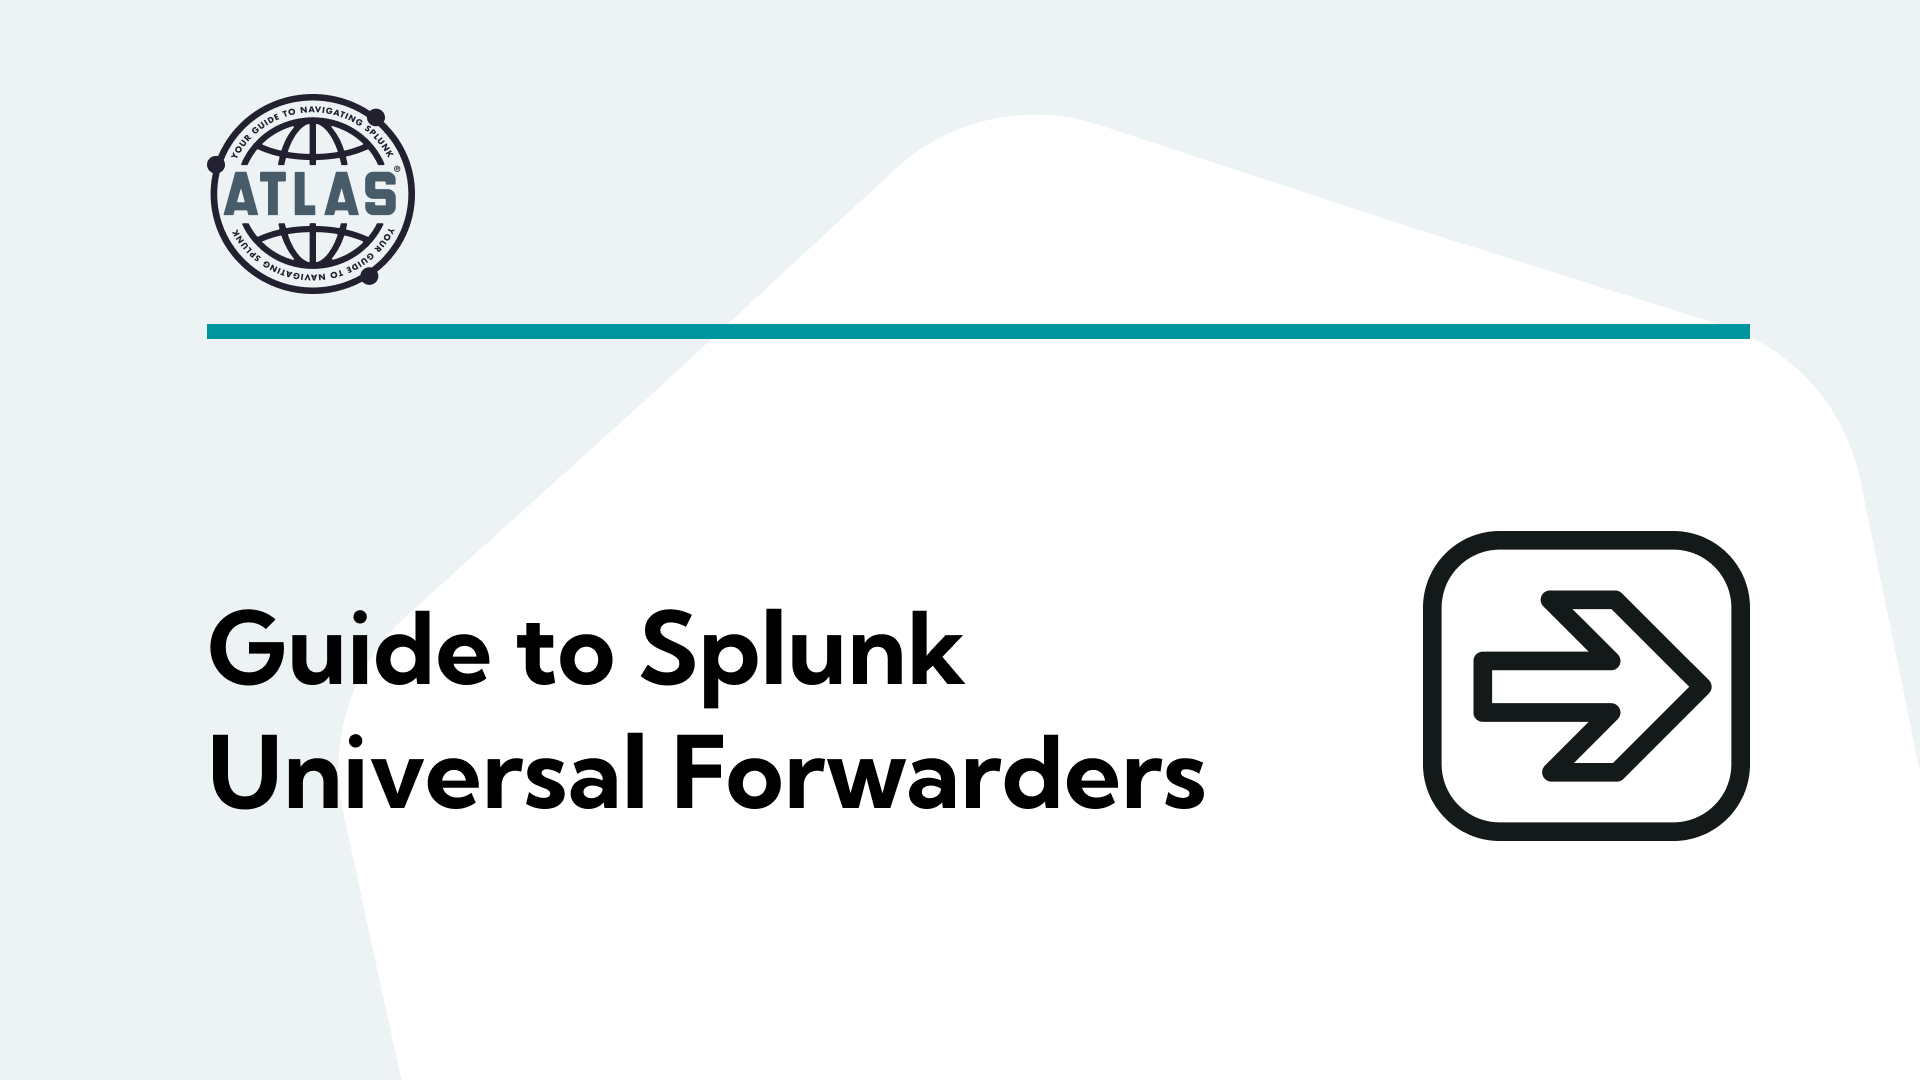 Guide to Splunk Universal Forwarders